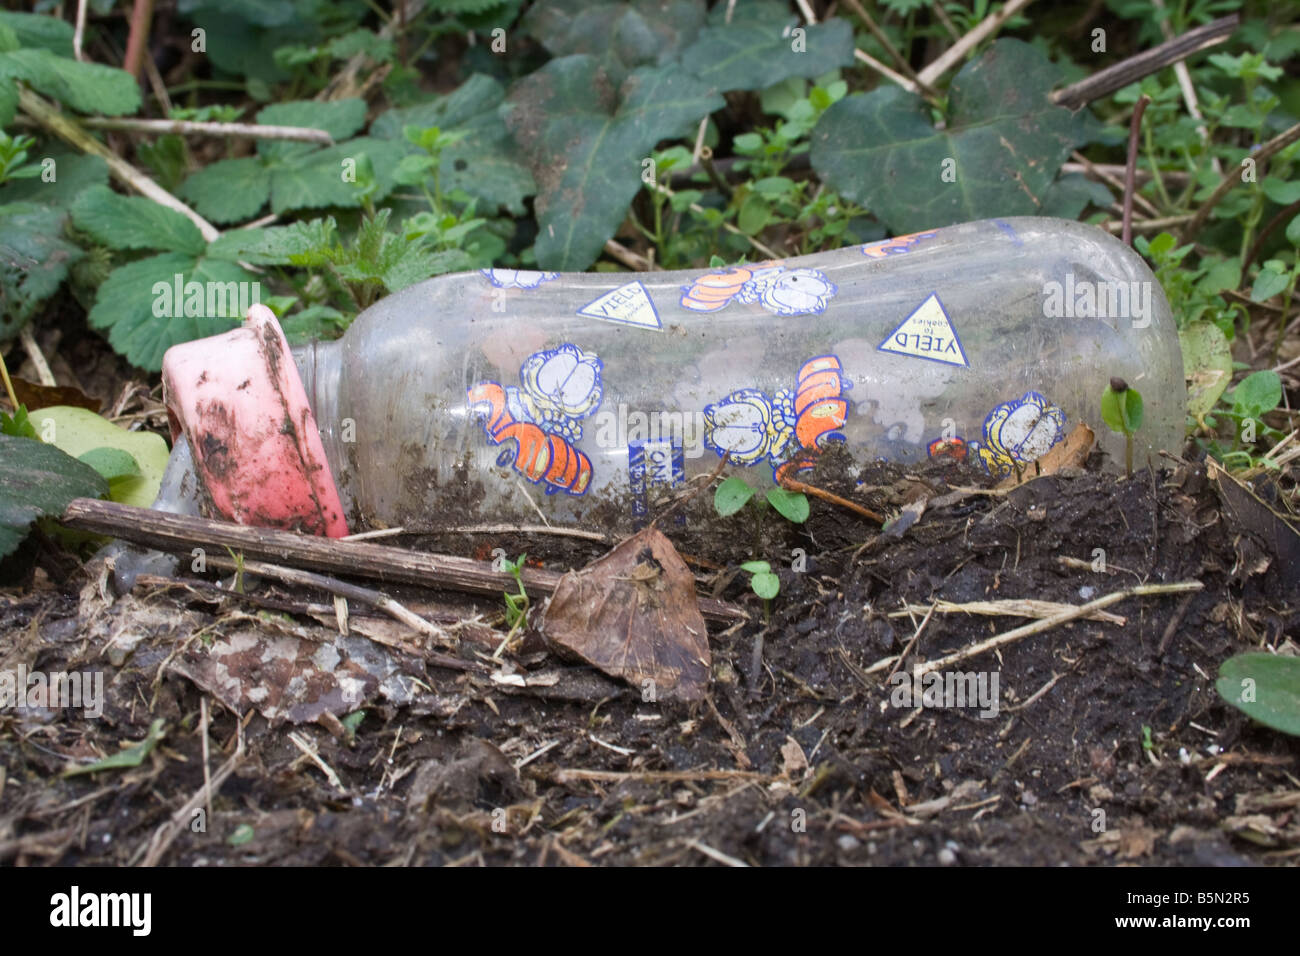 A baby bottle that has been thrown away in a hedgerow. Stock Photo